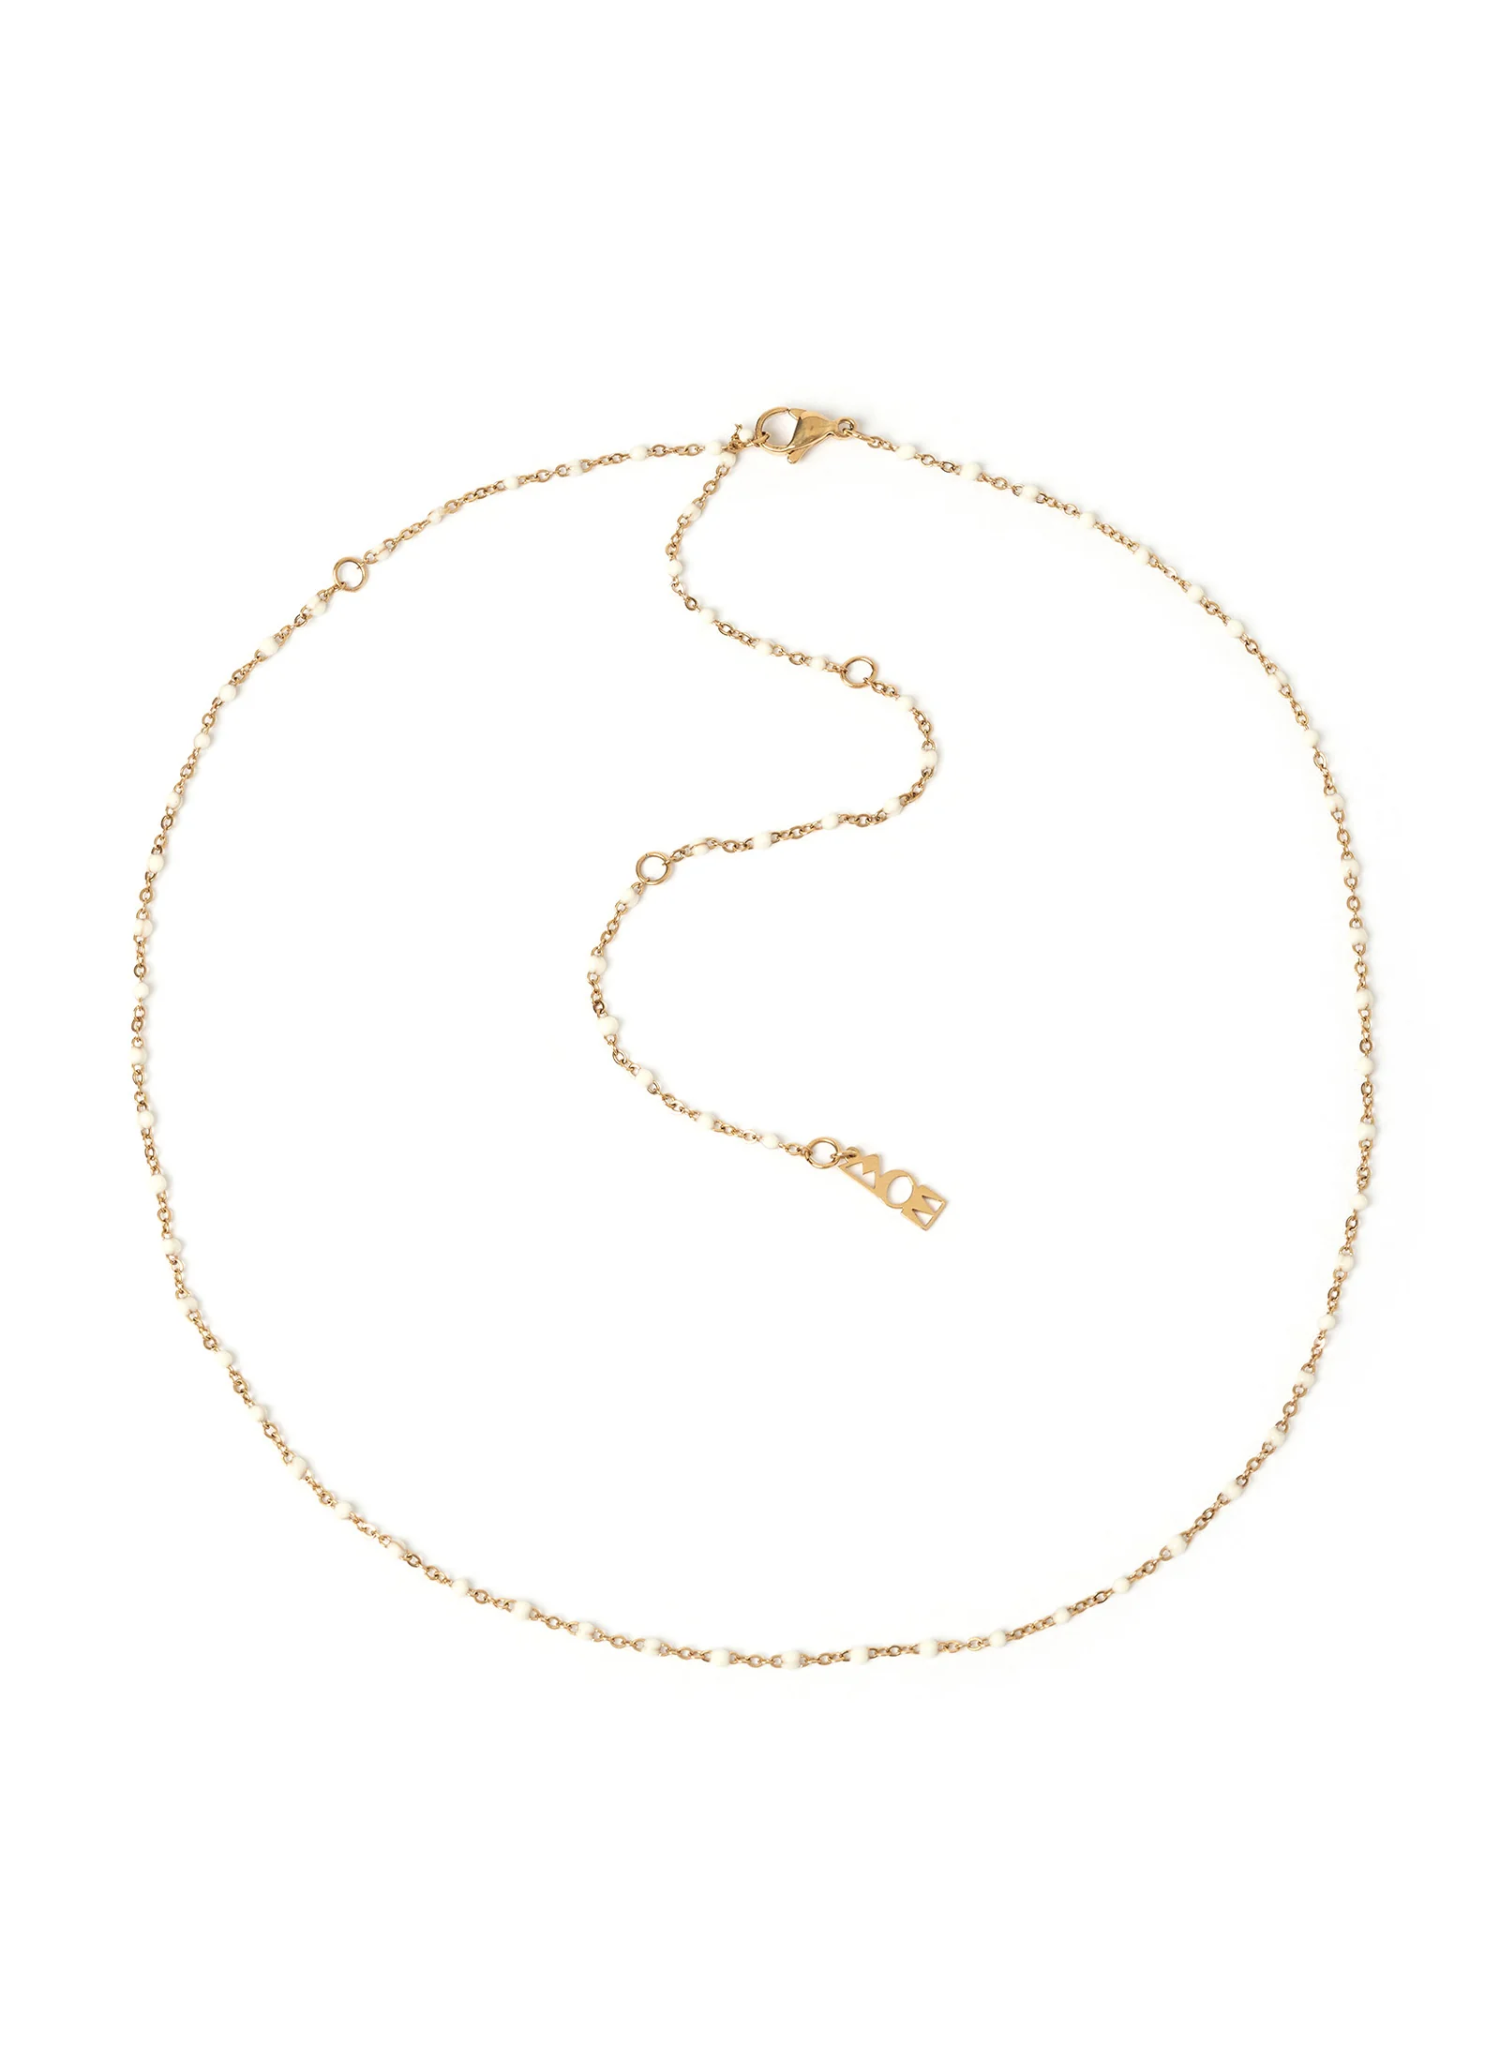 Peggy Gold and Enamel Necklace - Vanilla